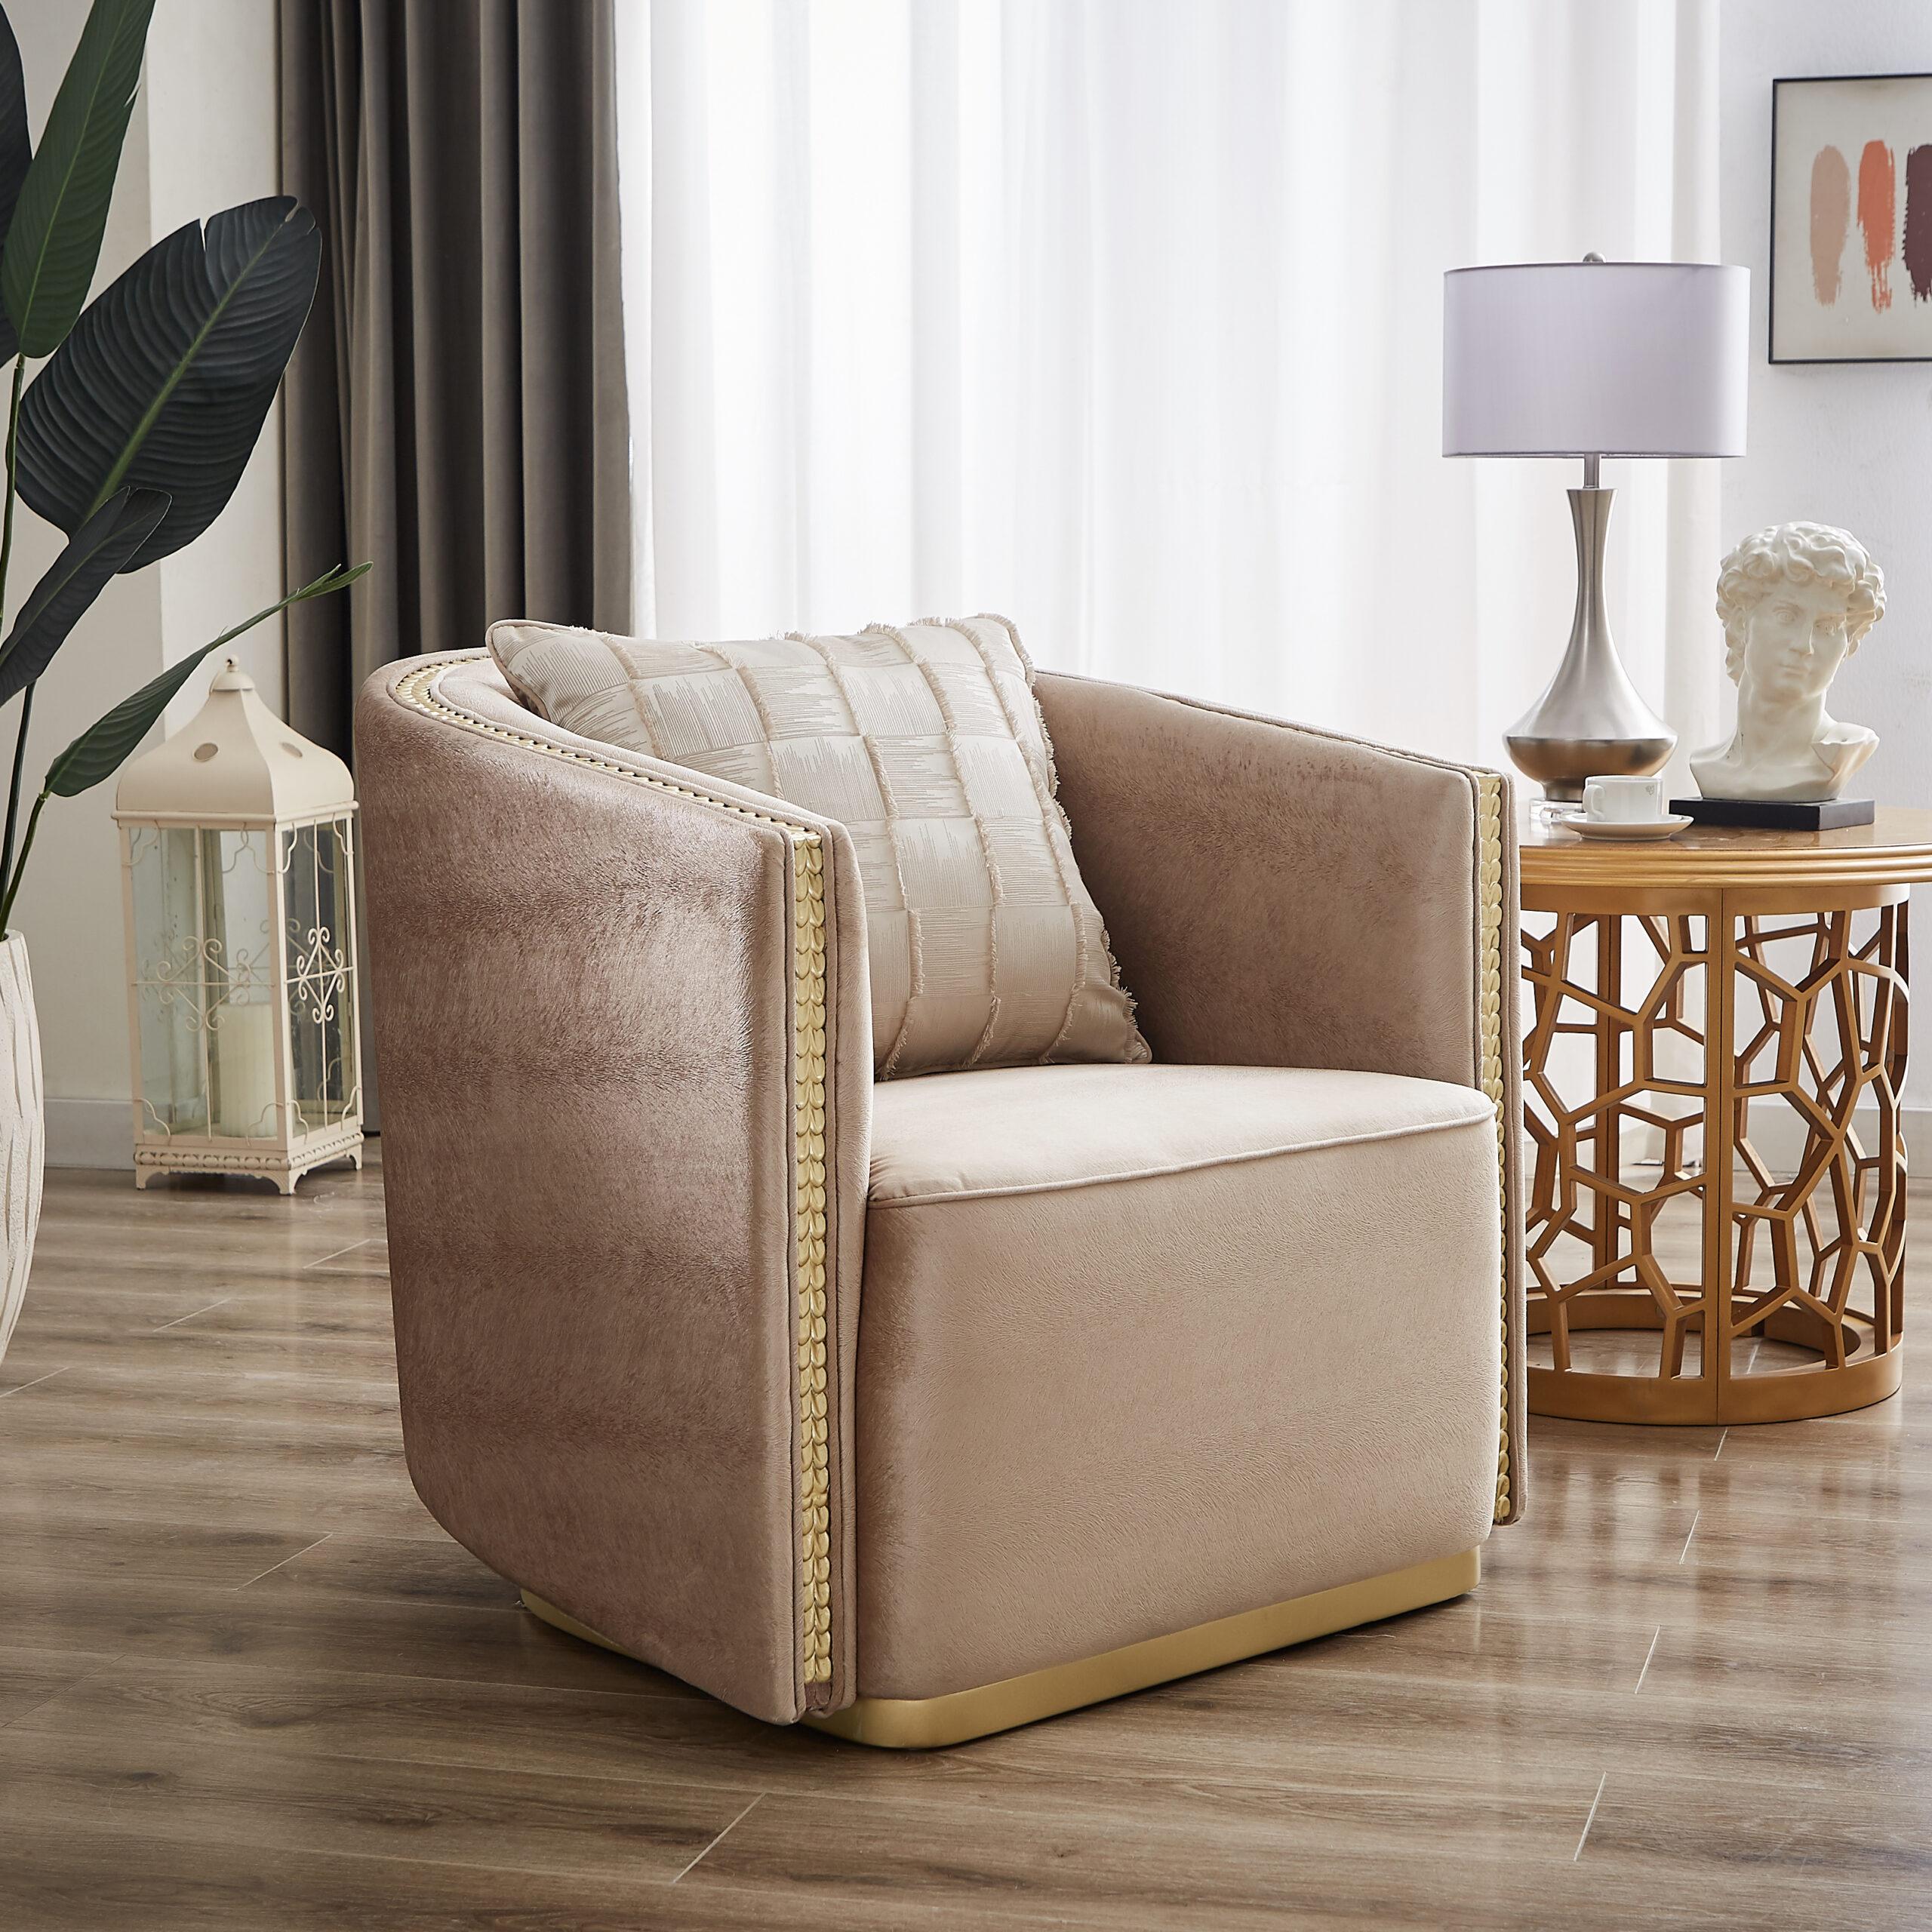 Classic, Traditional Chair HD-9040 Chair HD-C9040 HD-C9040 in Gold, Beige Fabric